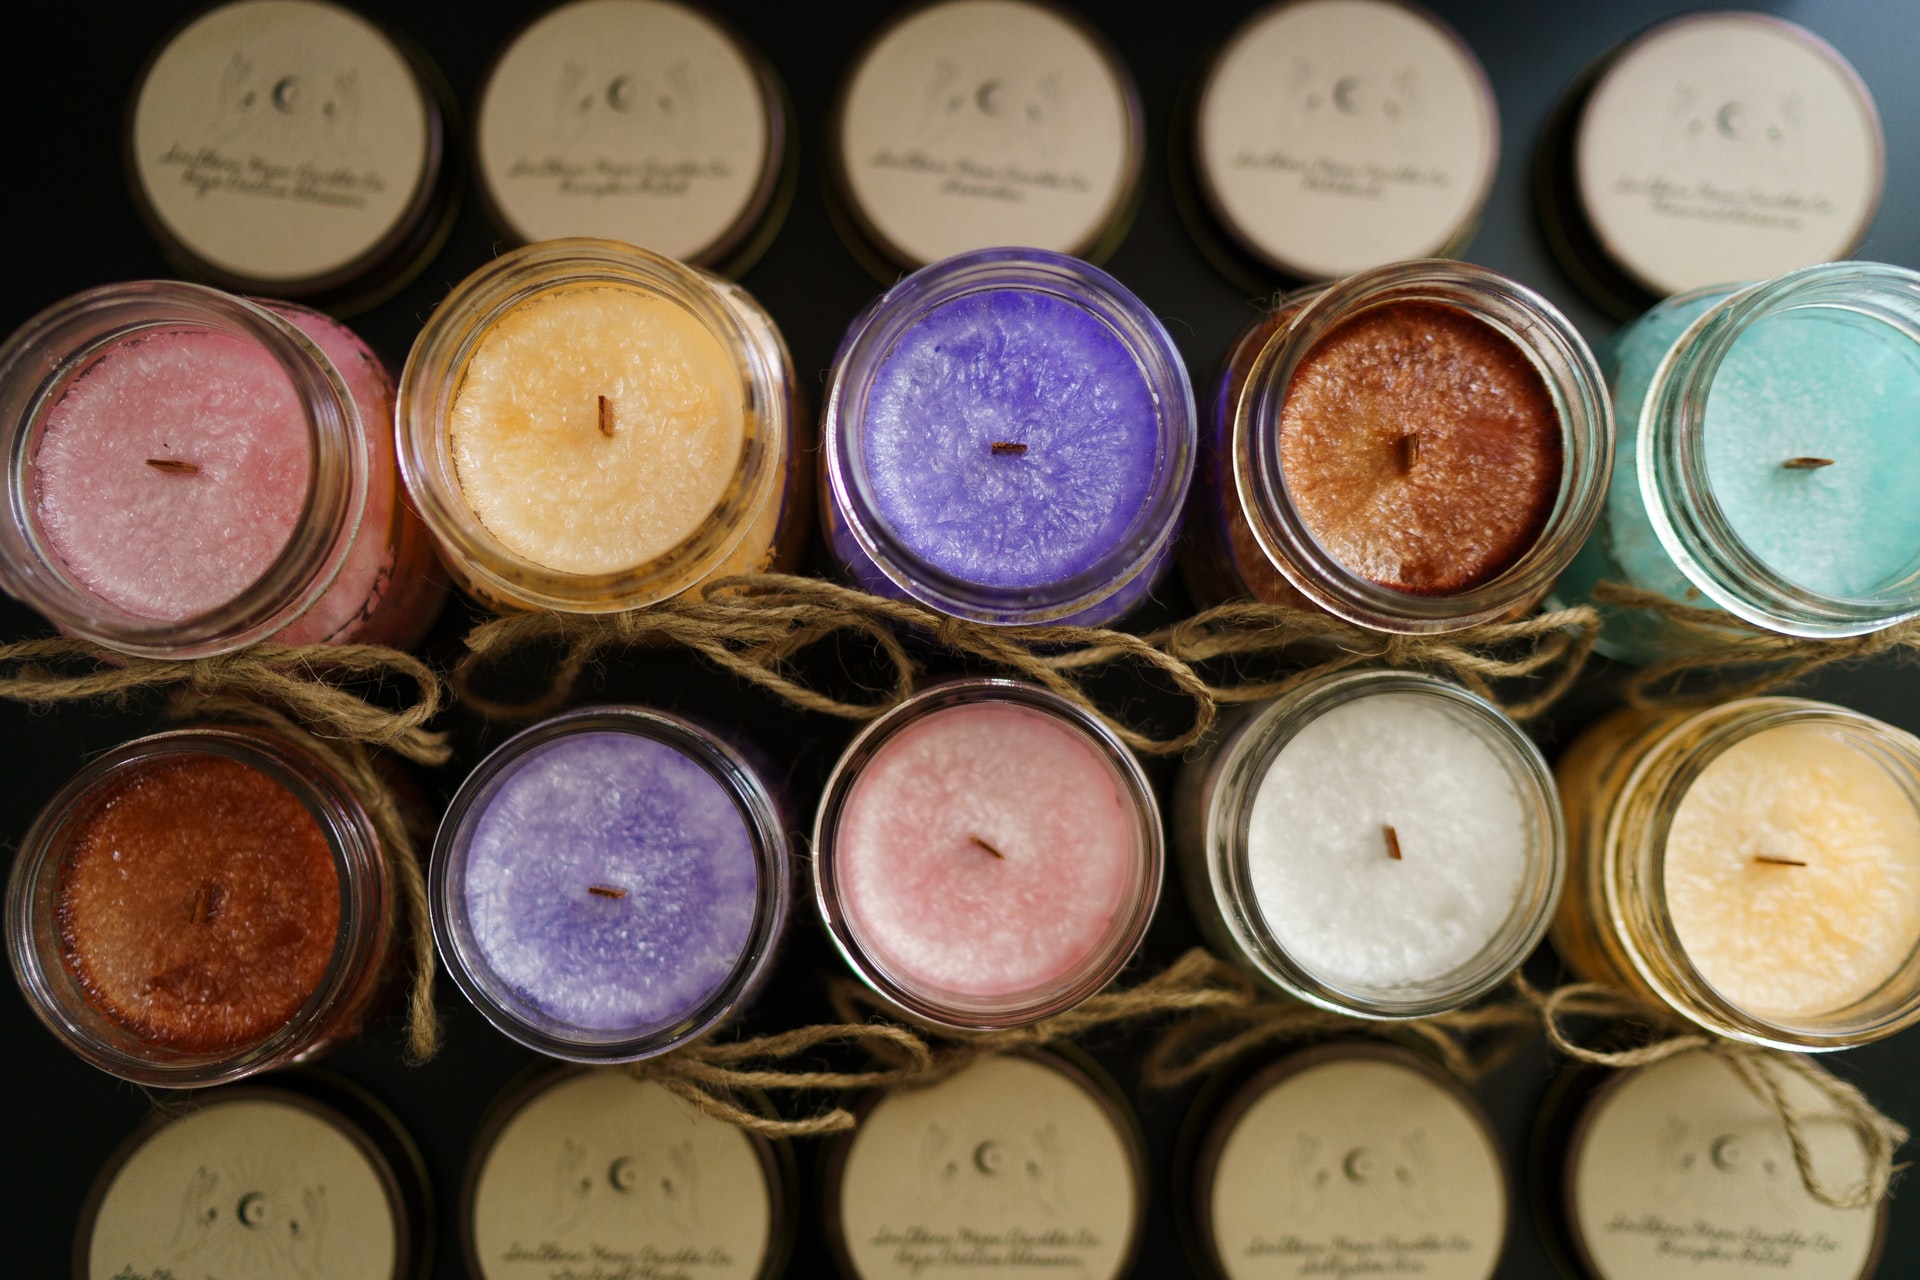 Get Your House To Smell Nicer With These Candles